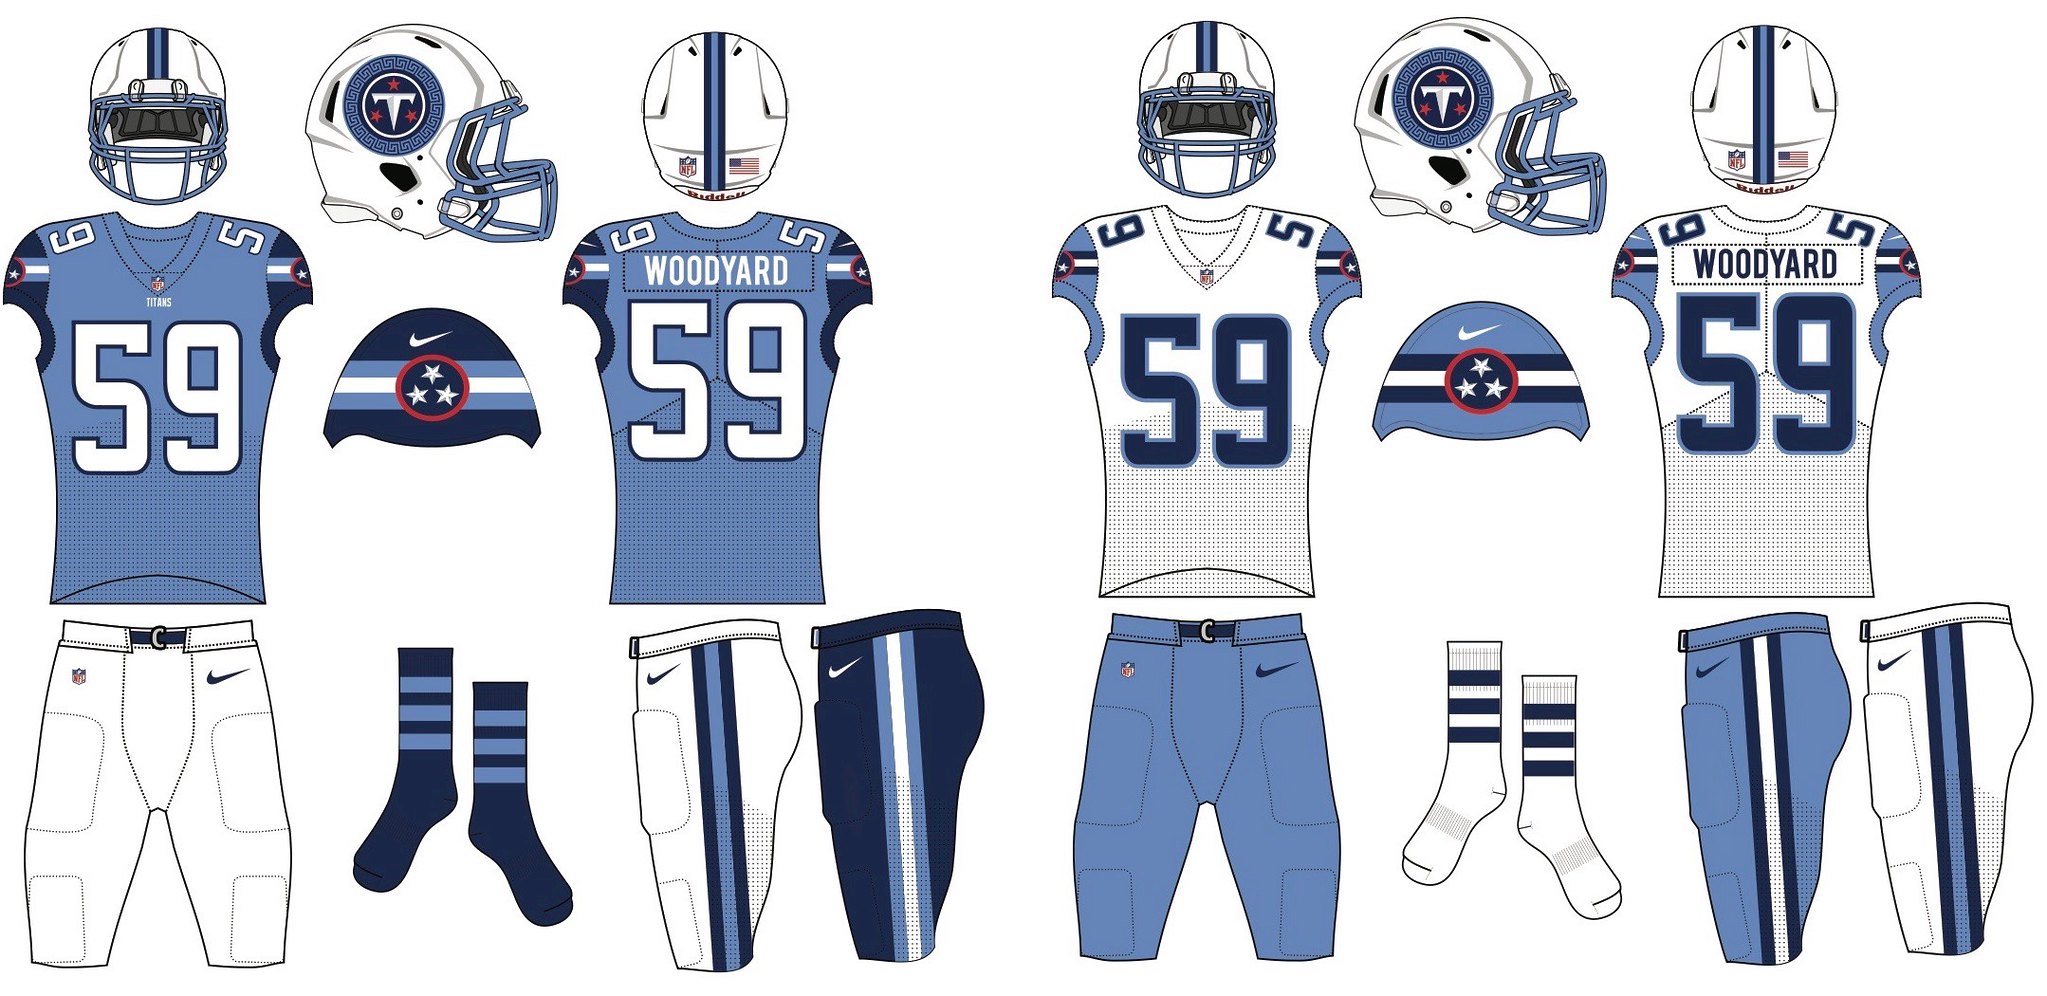 NFL approves alternate helmet designs, opening the door for Throwback  uniforms! - Page 2 - Titans and NFL Talk - Titans Report Message Board